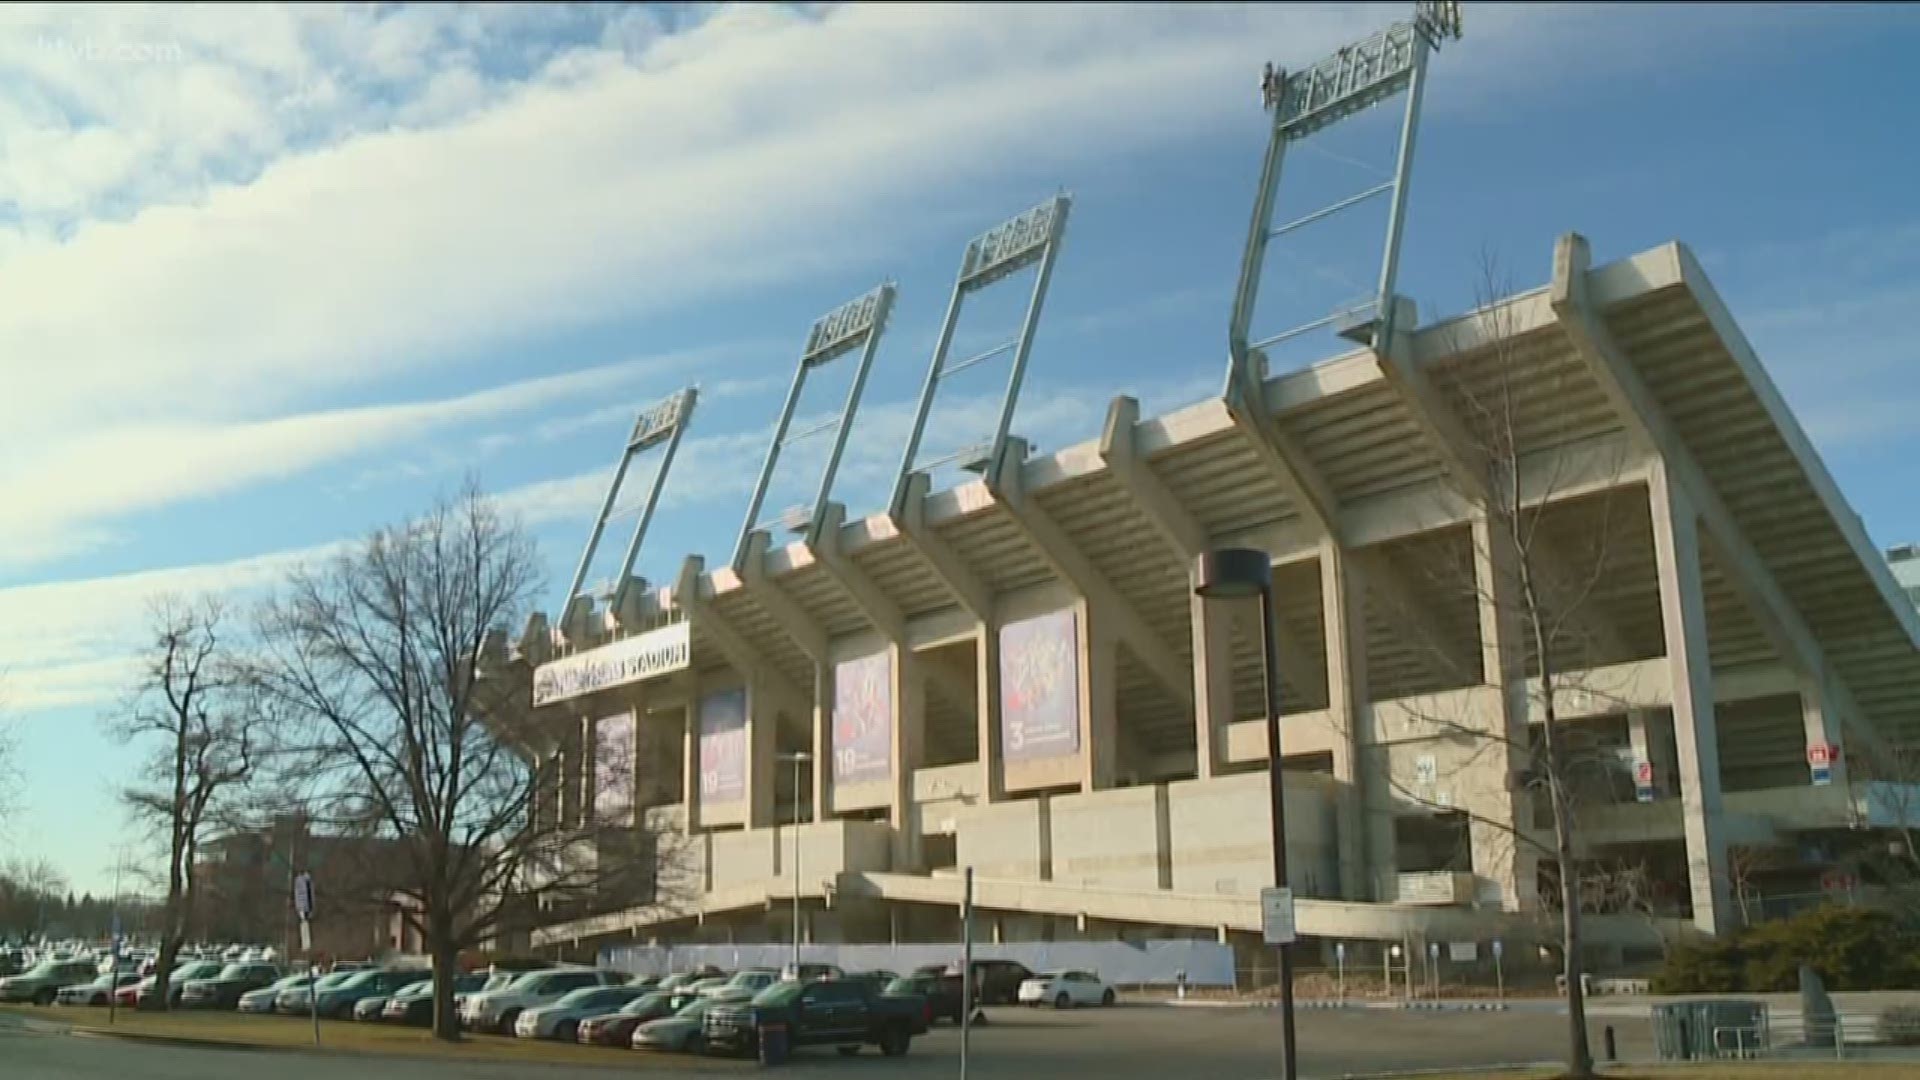 Officials have not released a timeline or projected cost of the renovations.